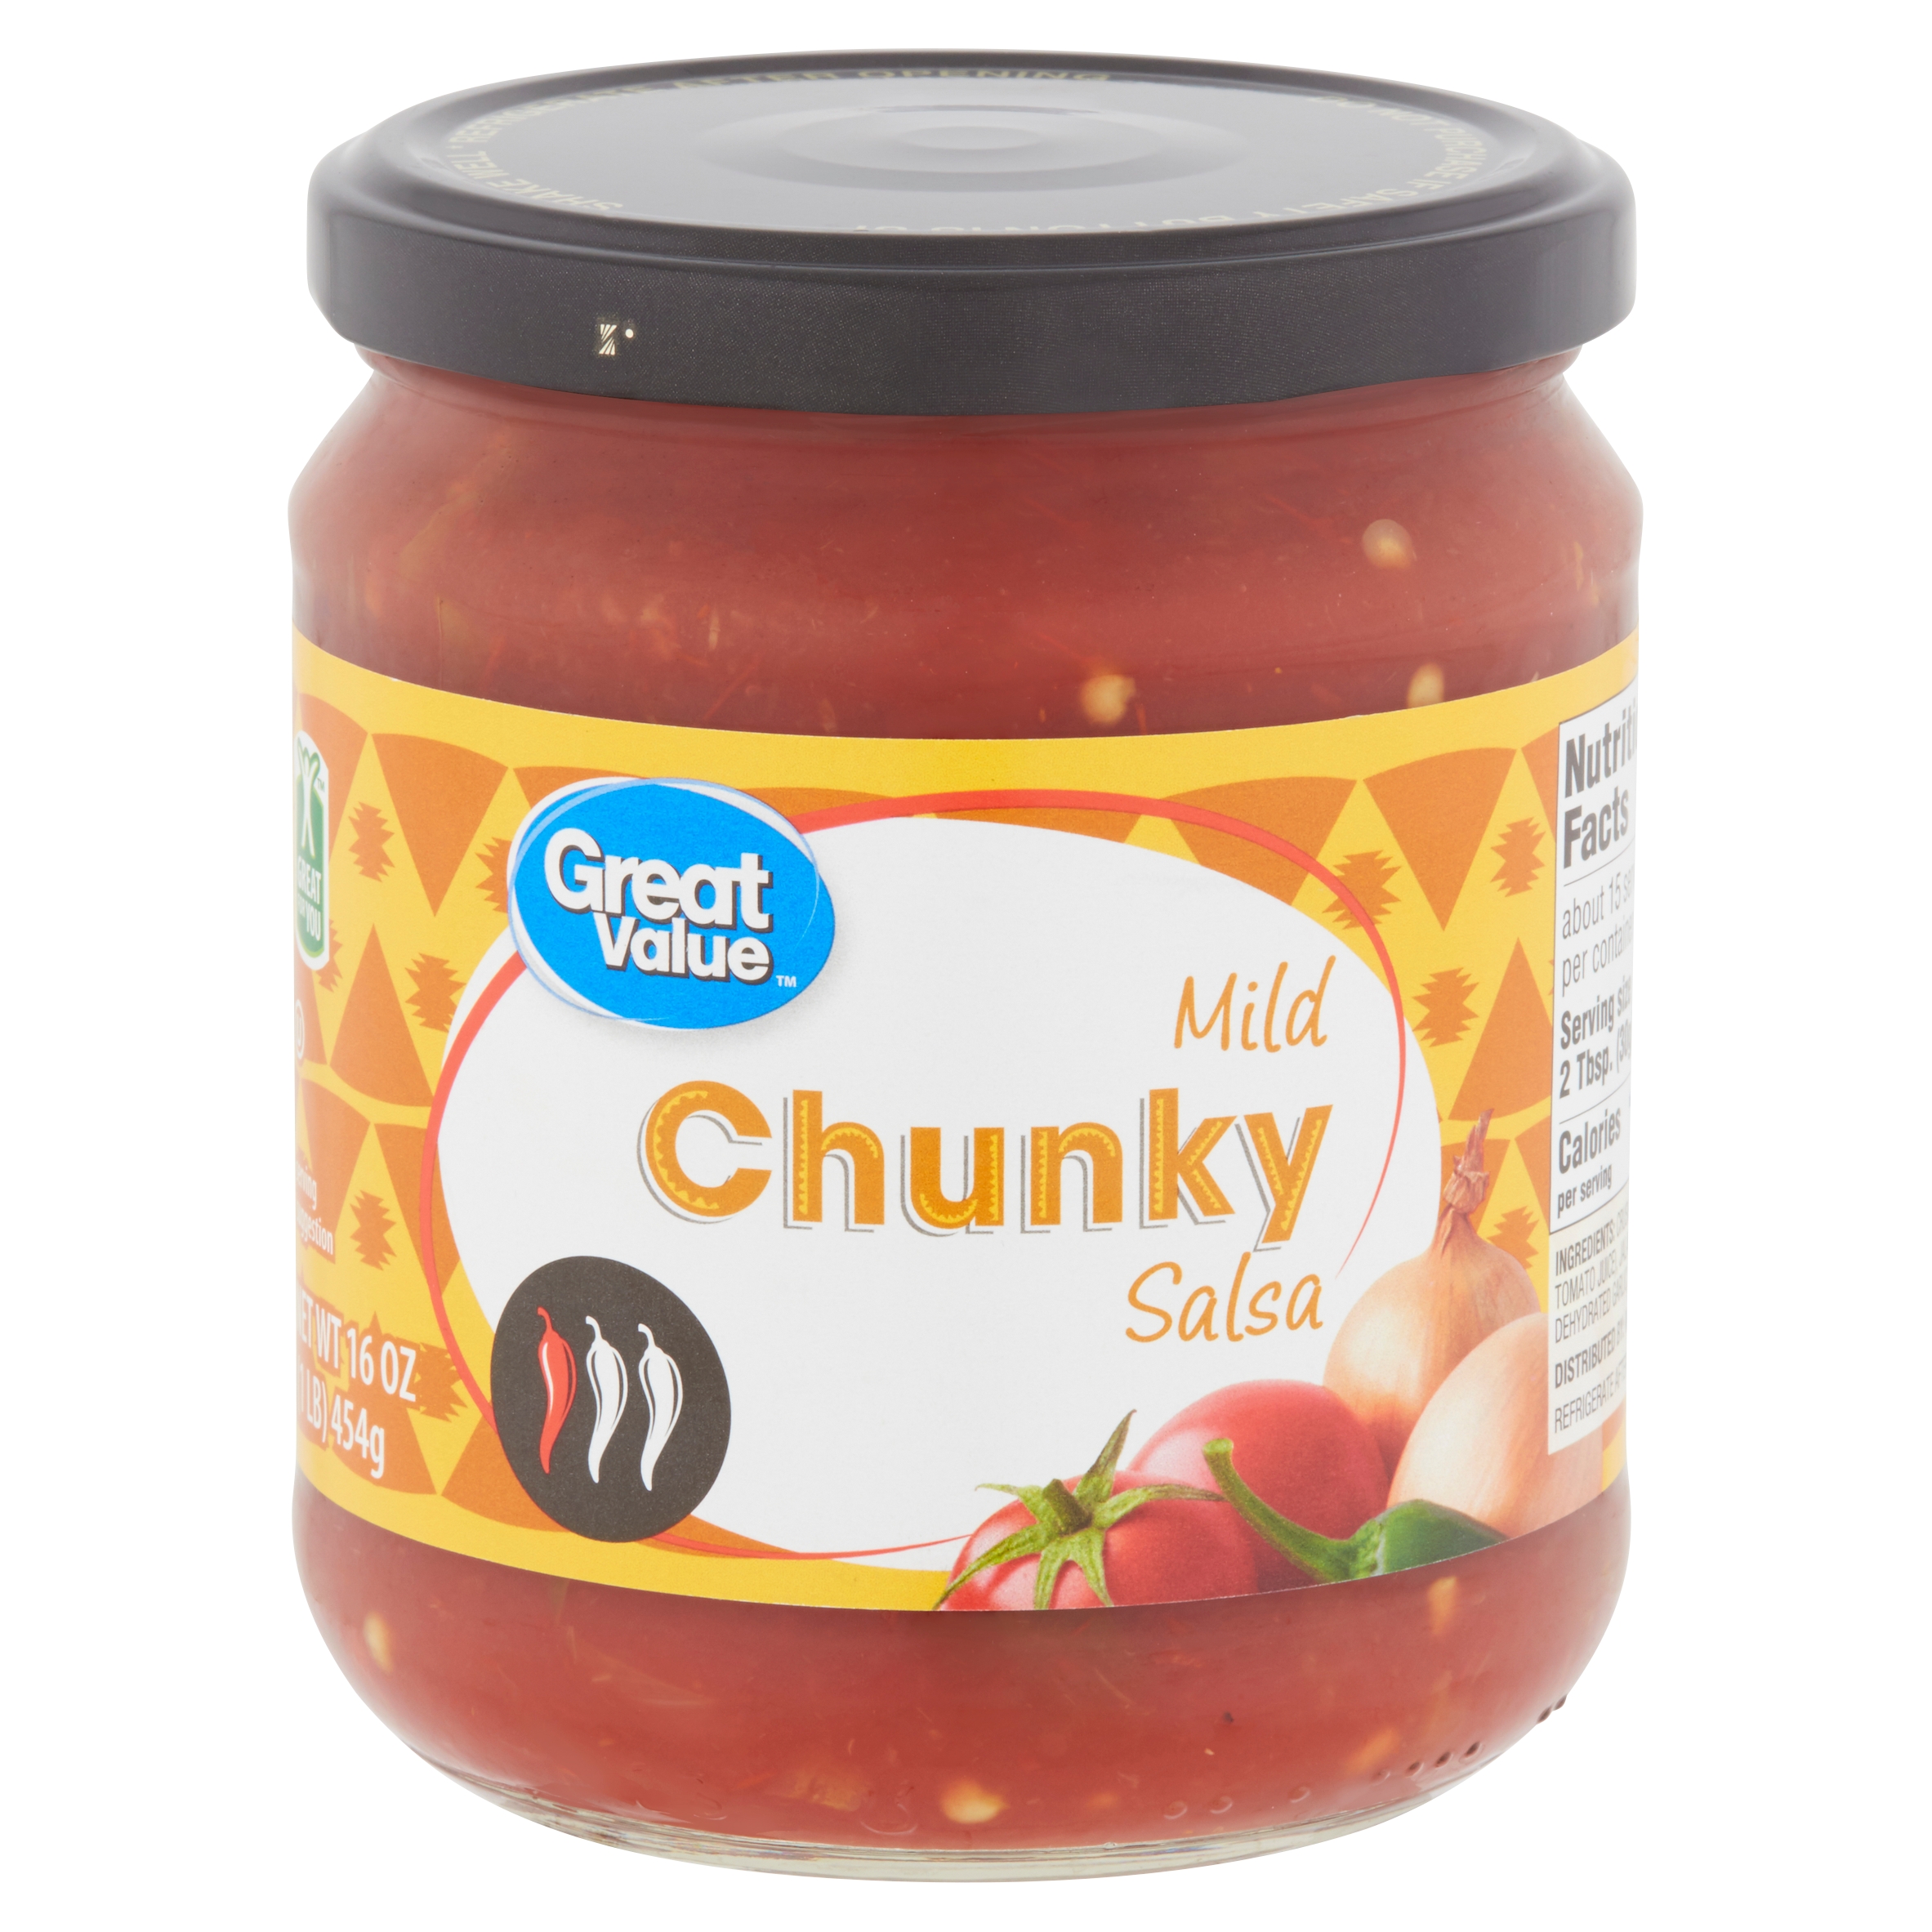 (2 Pack) Great Value Mild Chunky Salsa, 16 Oz. Image